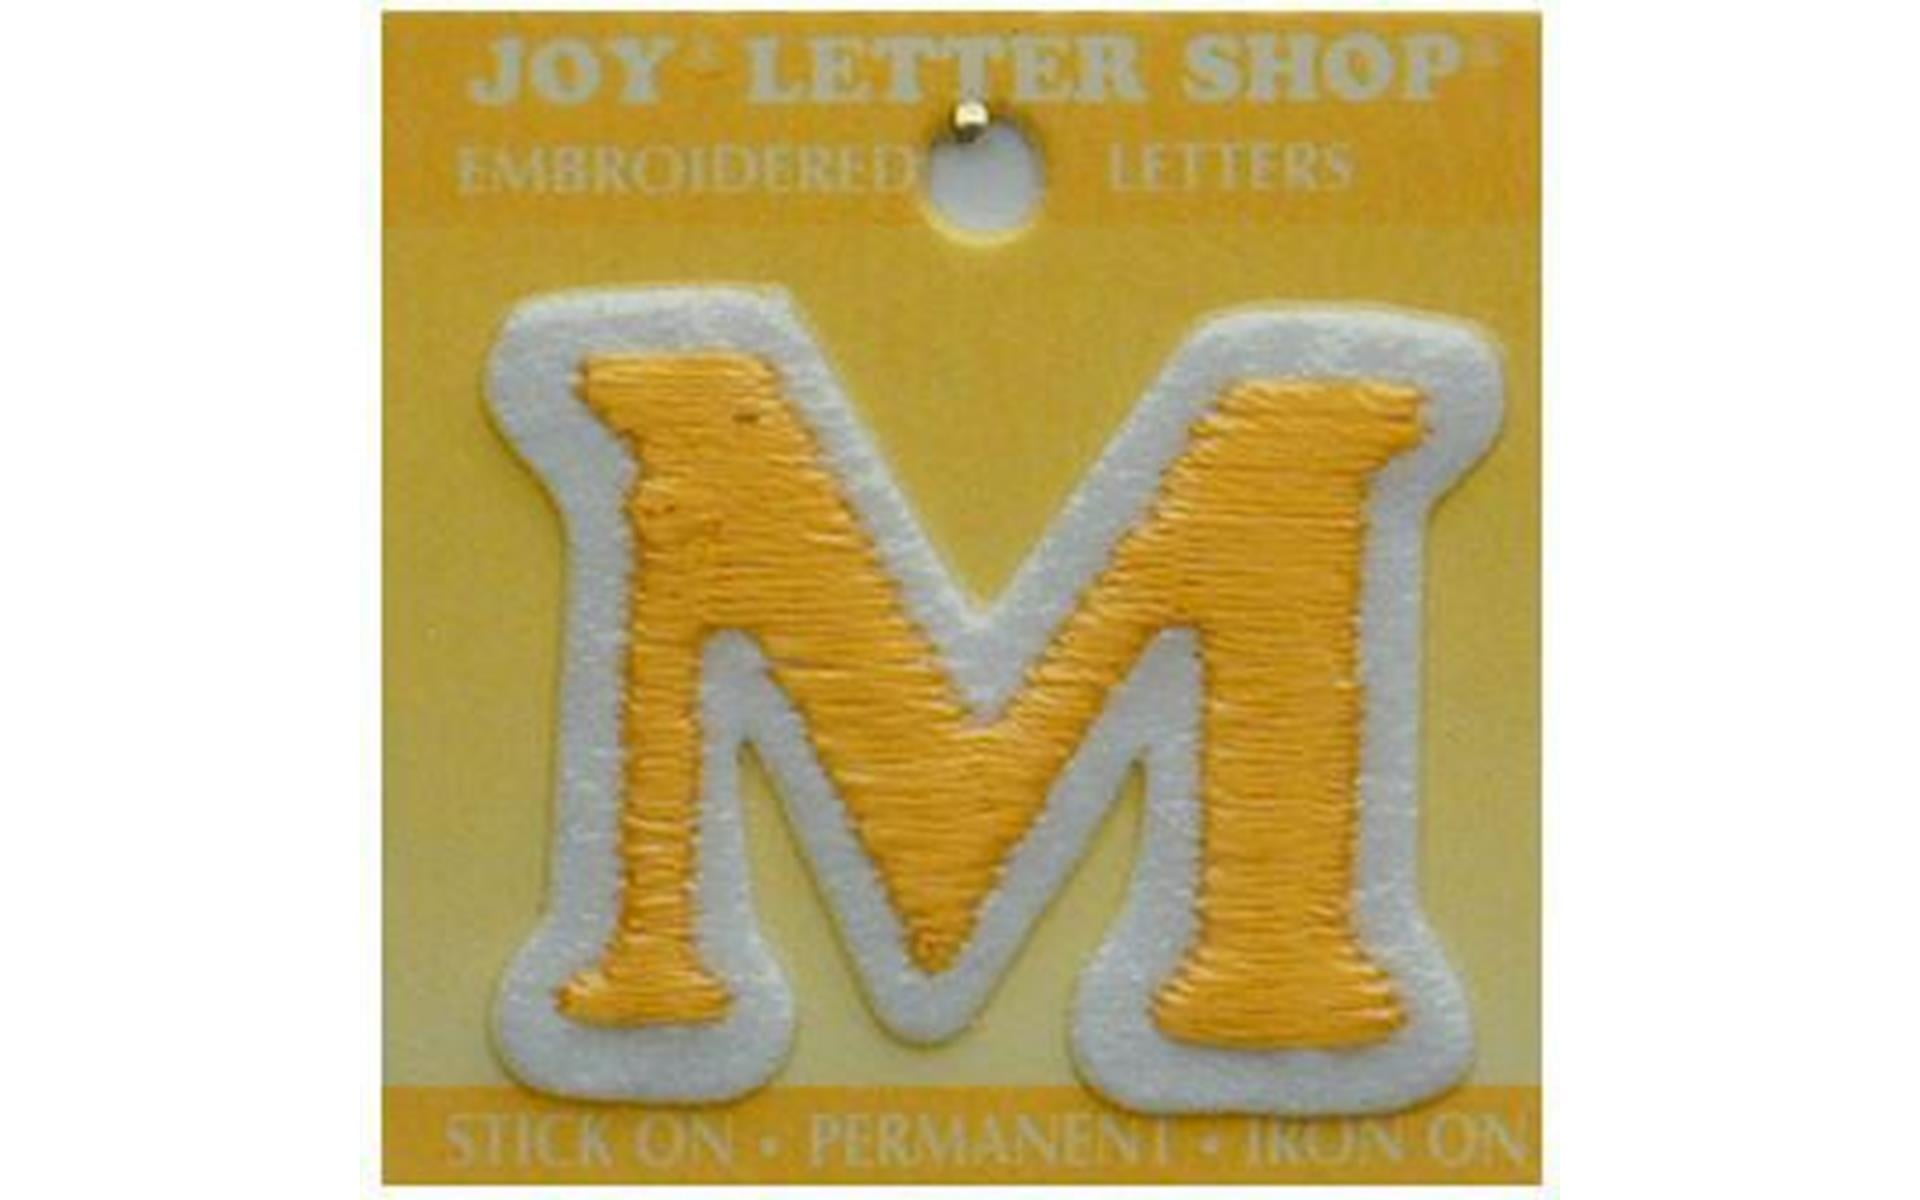 1.5 Iron-On Glitter Cooper Letters by Make Market®